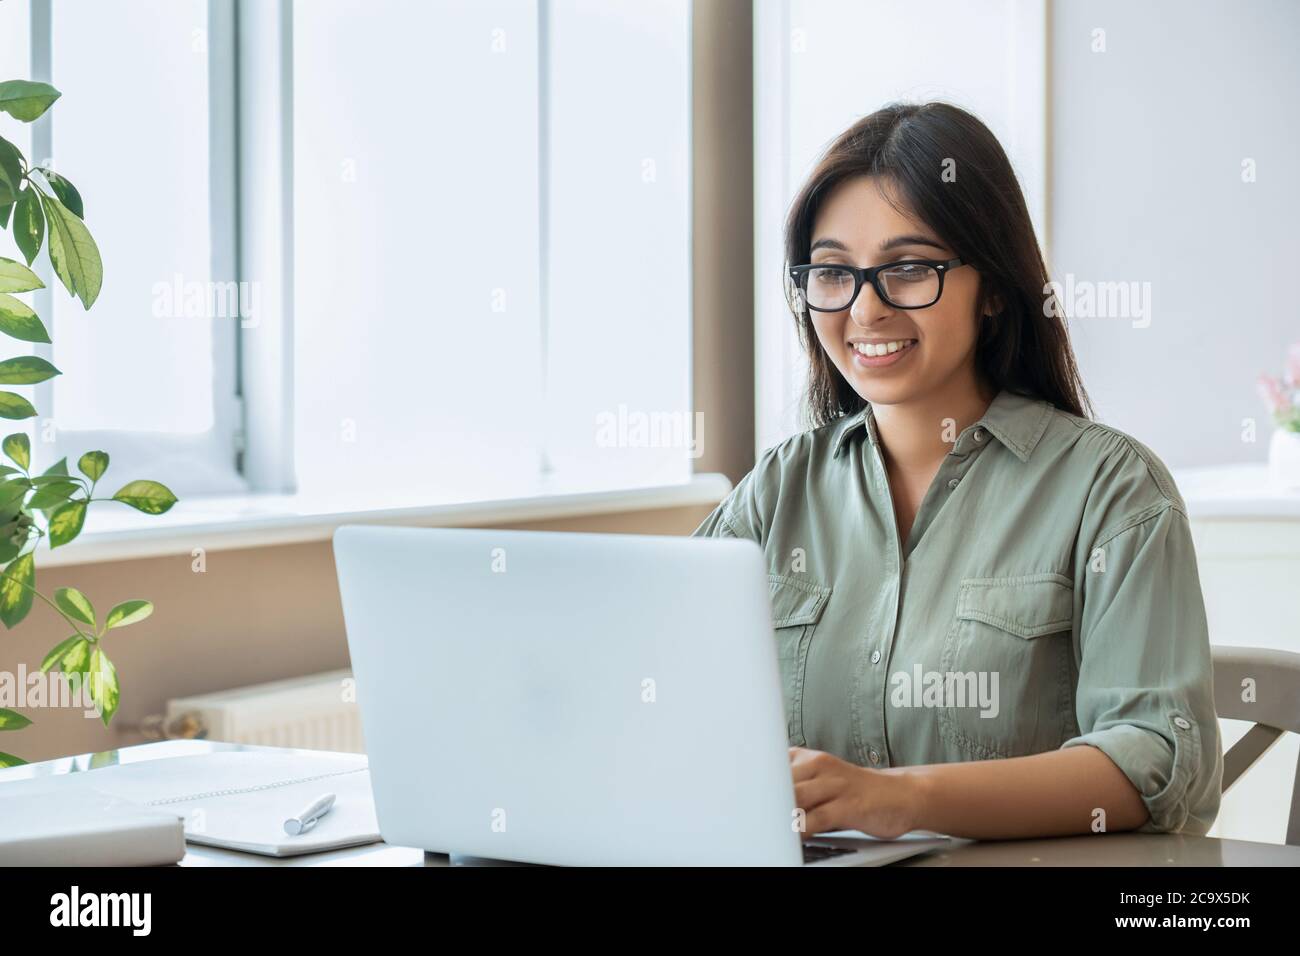 Happy indian young woman using laptop computer work study at home office. Stock Photo